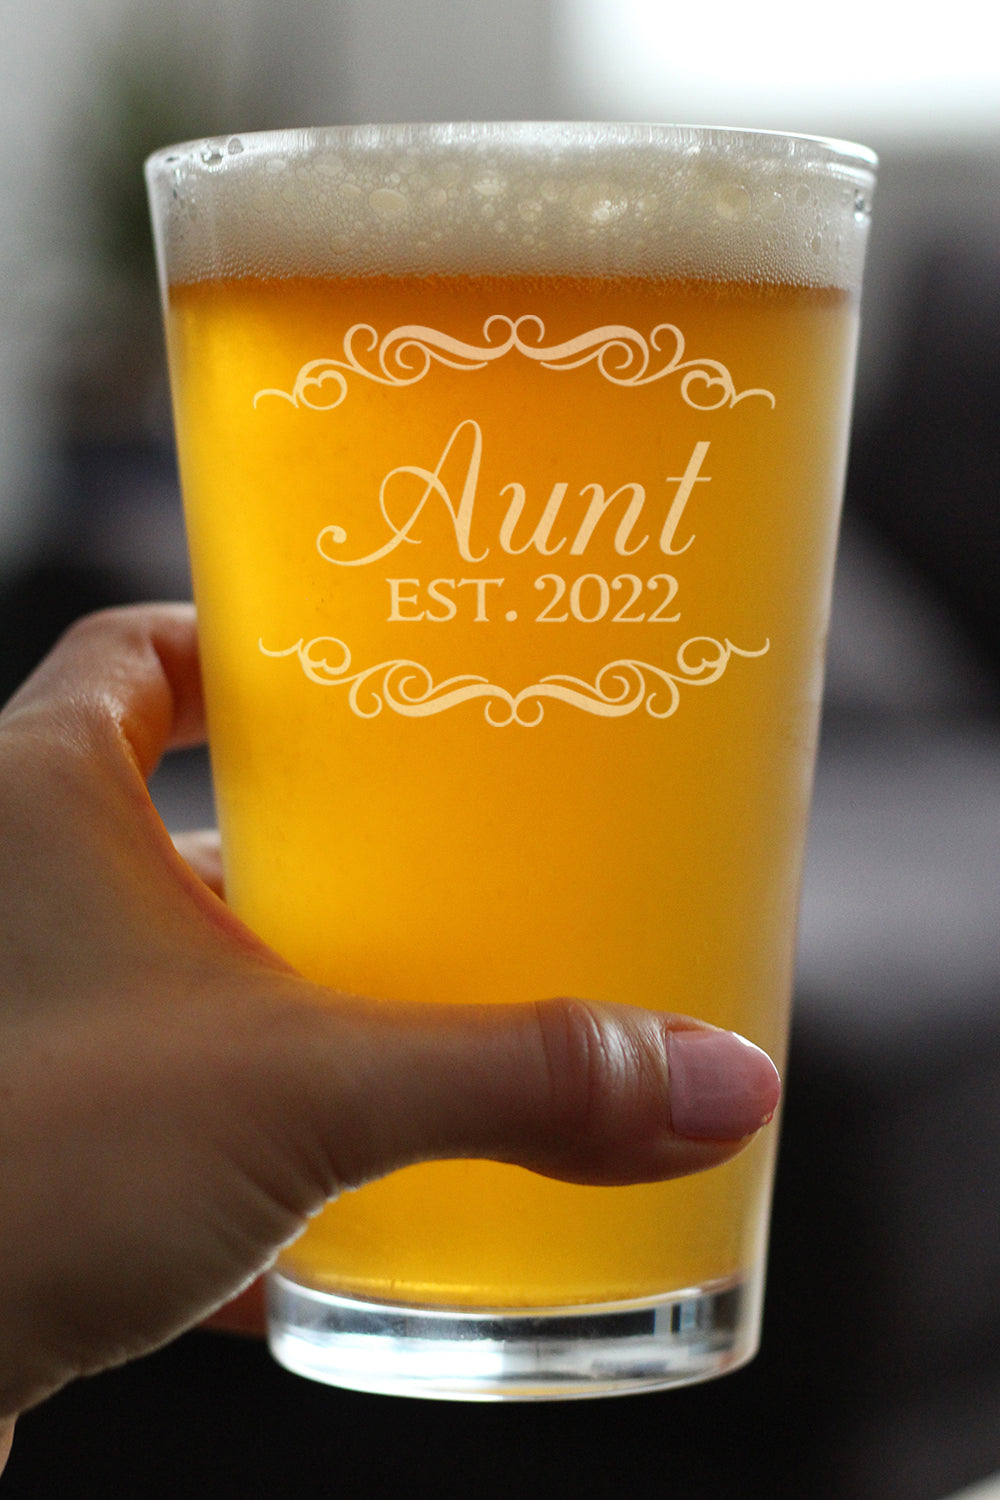 Aunt Est 2022 - New Aunties Pint Glass Gift for First Time Aunts - Decorative 16 Oz Glasses